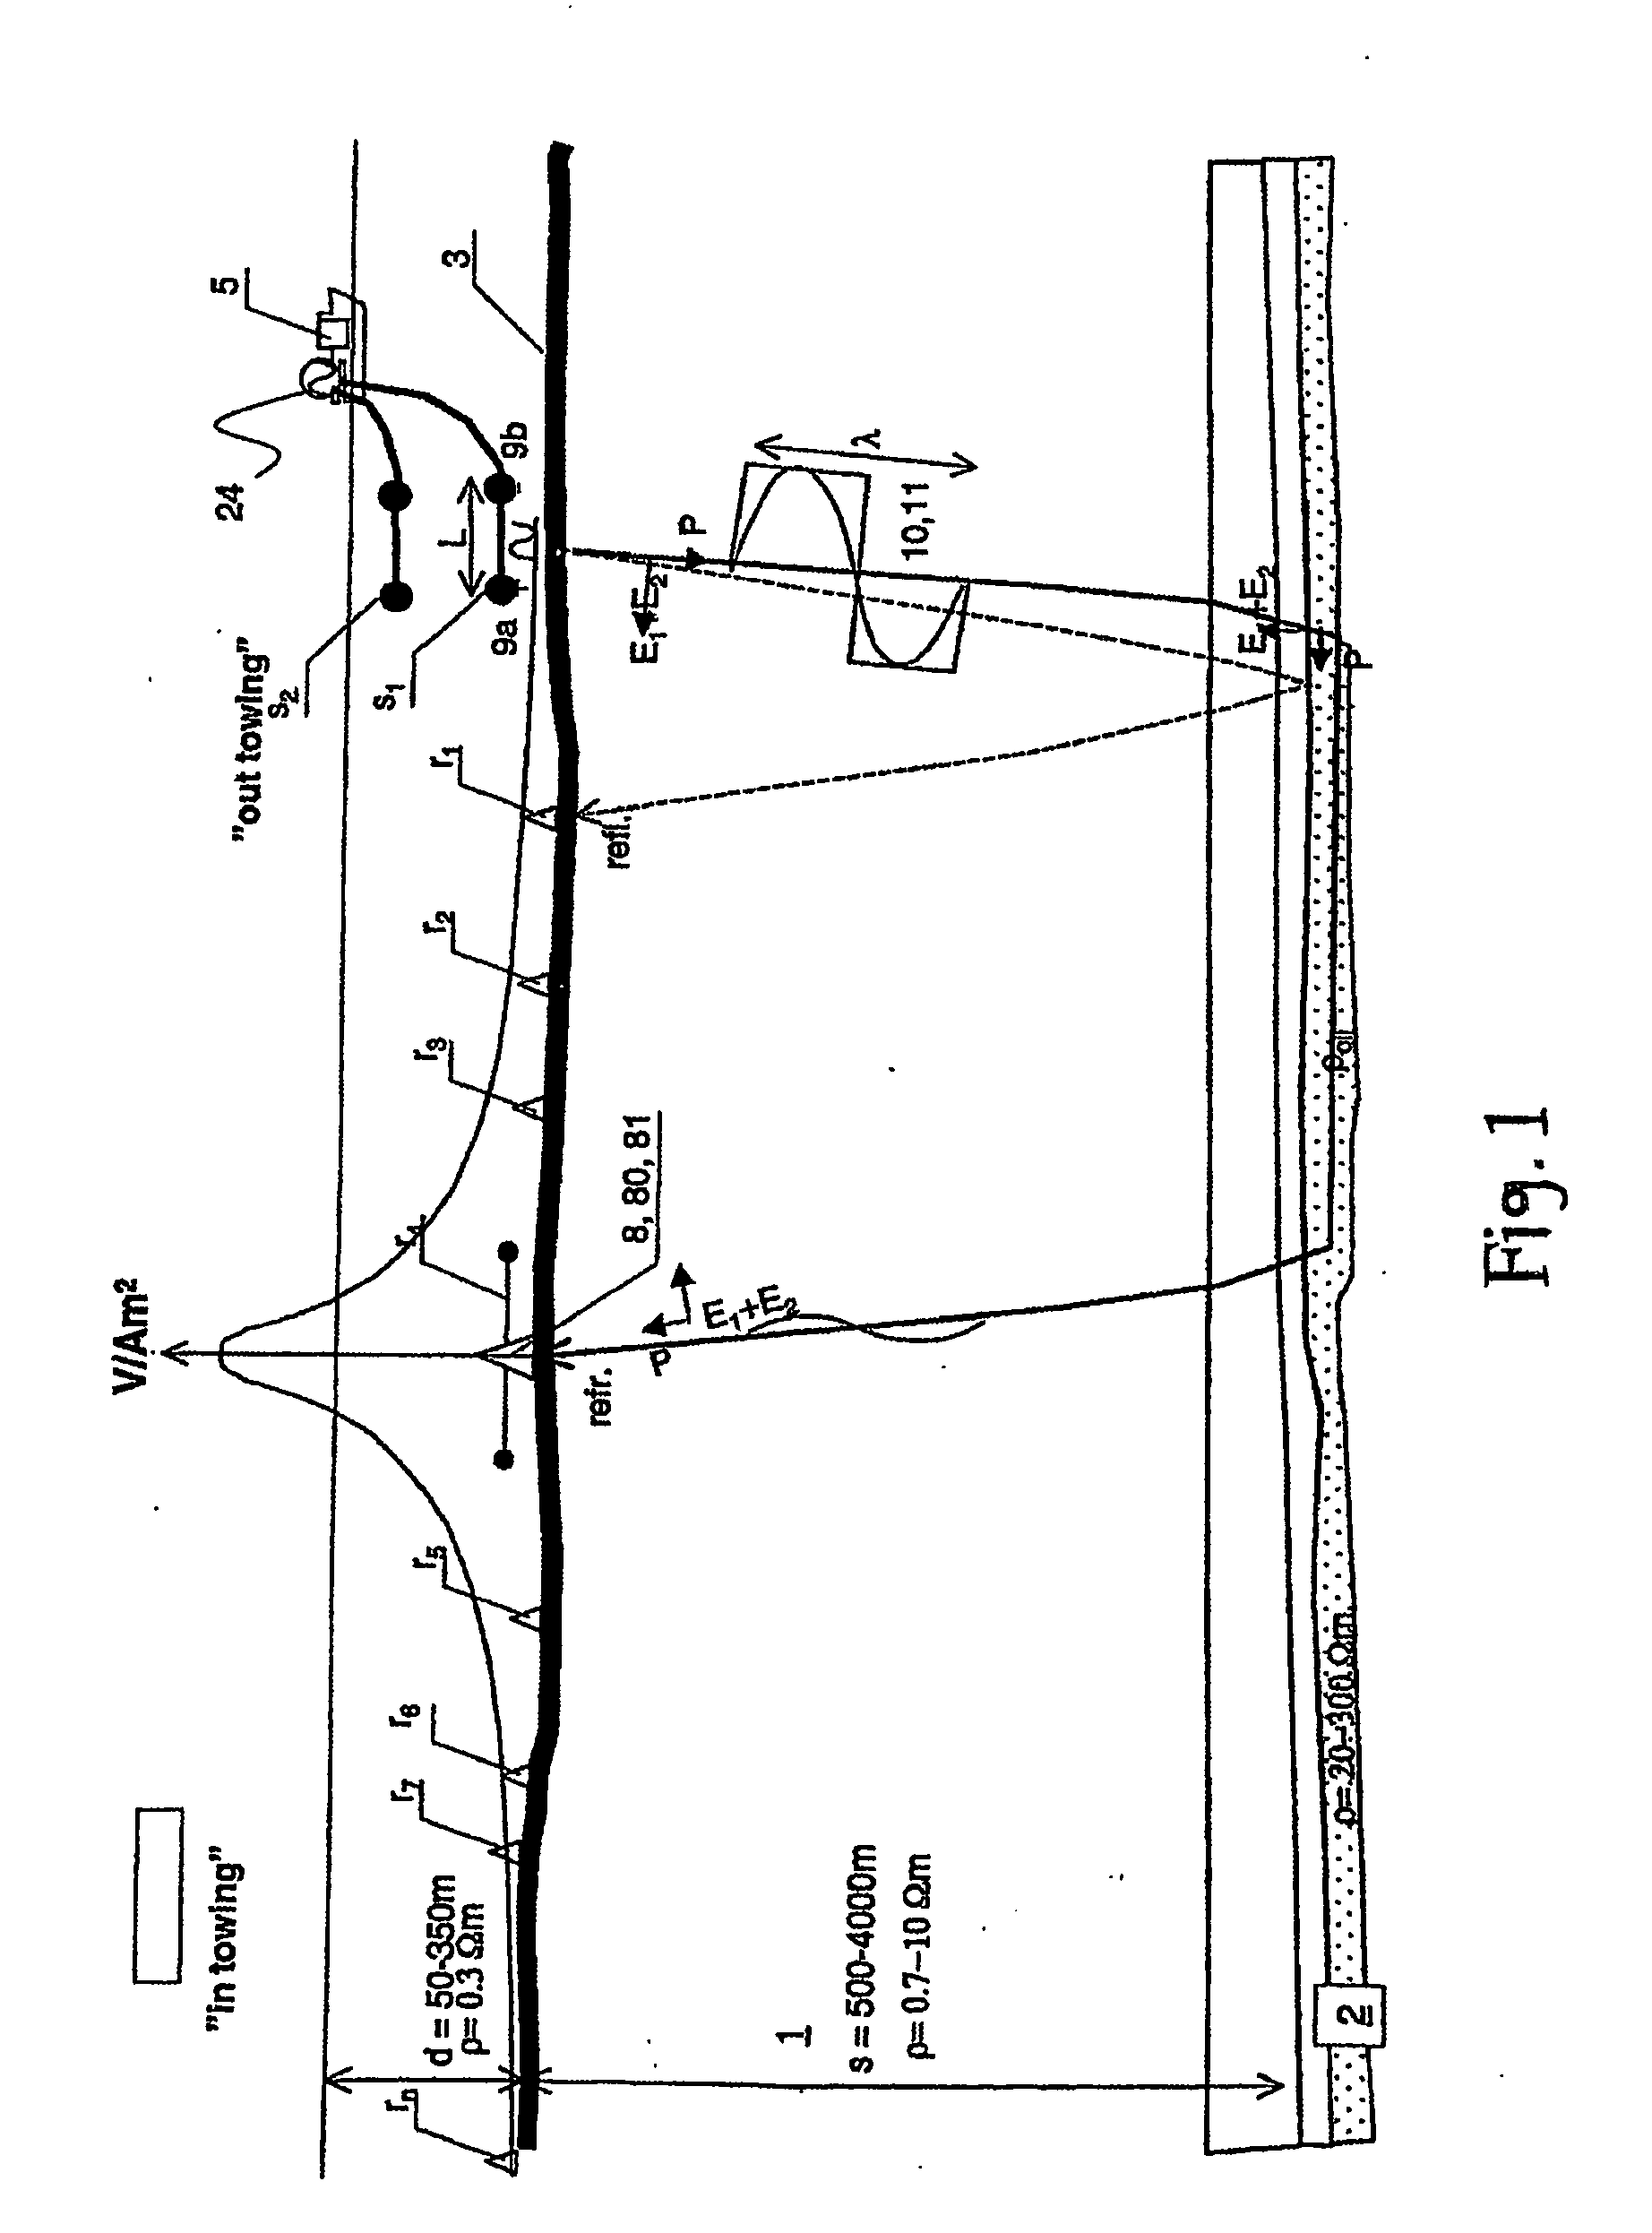 Method for Electromagnetic Geophysical Surveying of Subsea Rock Formations